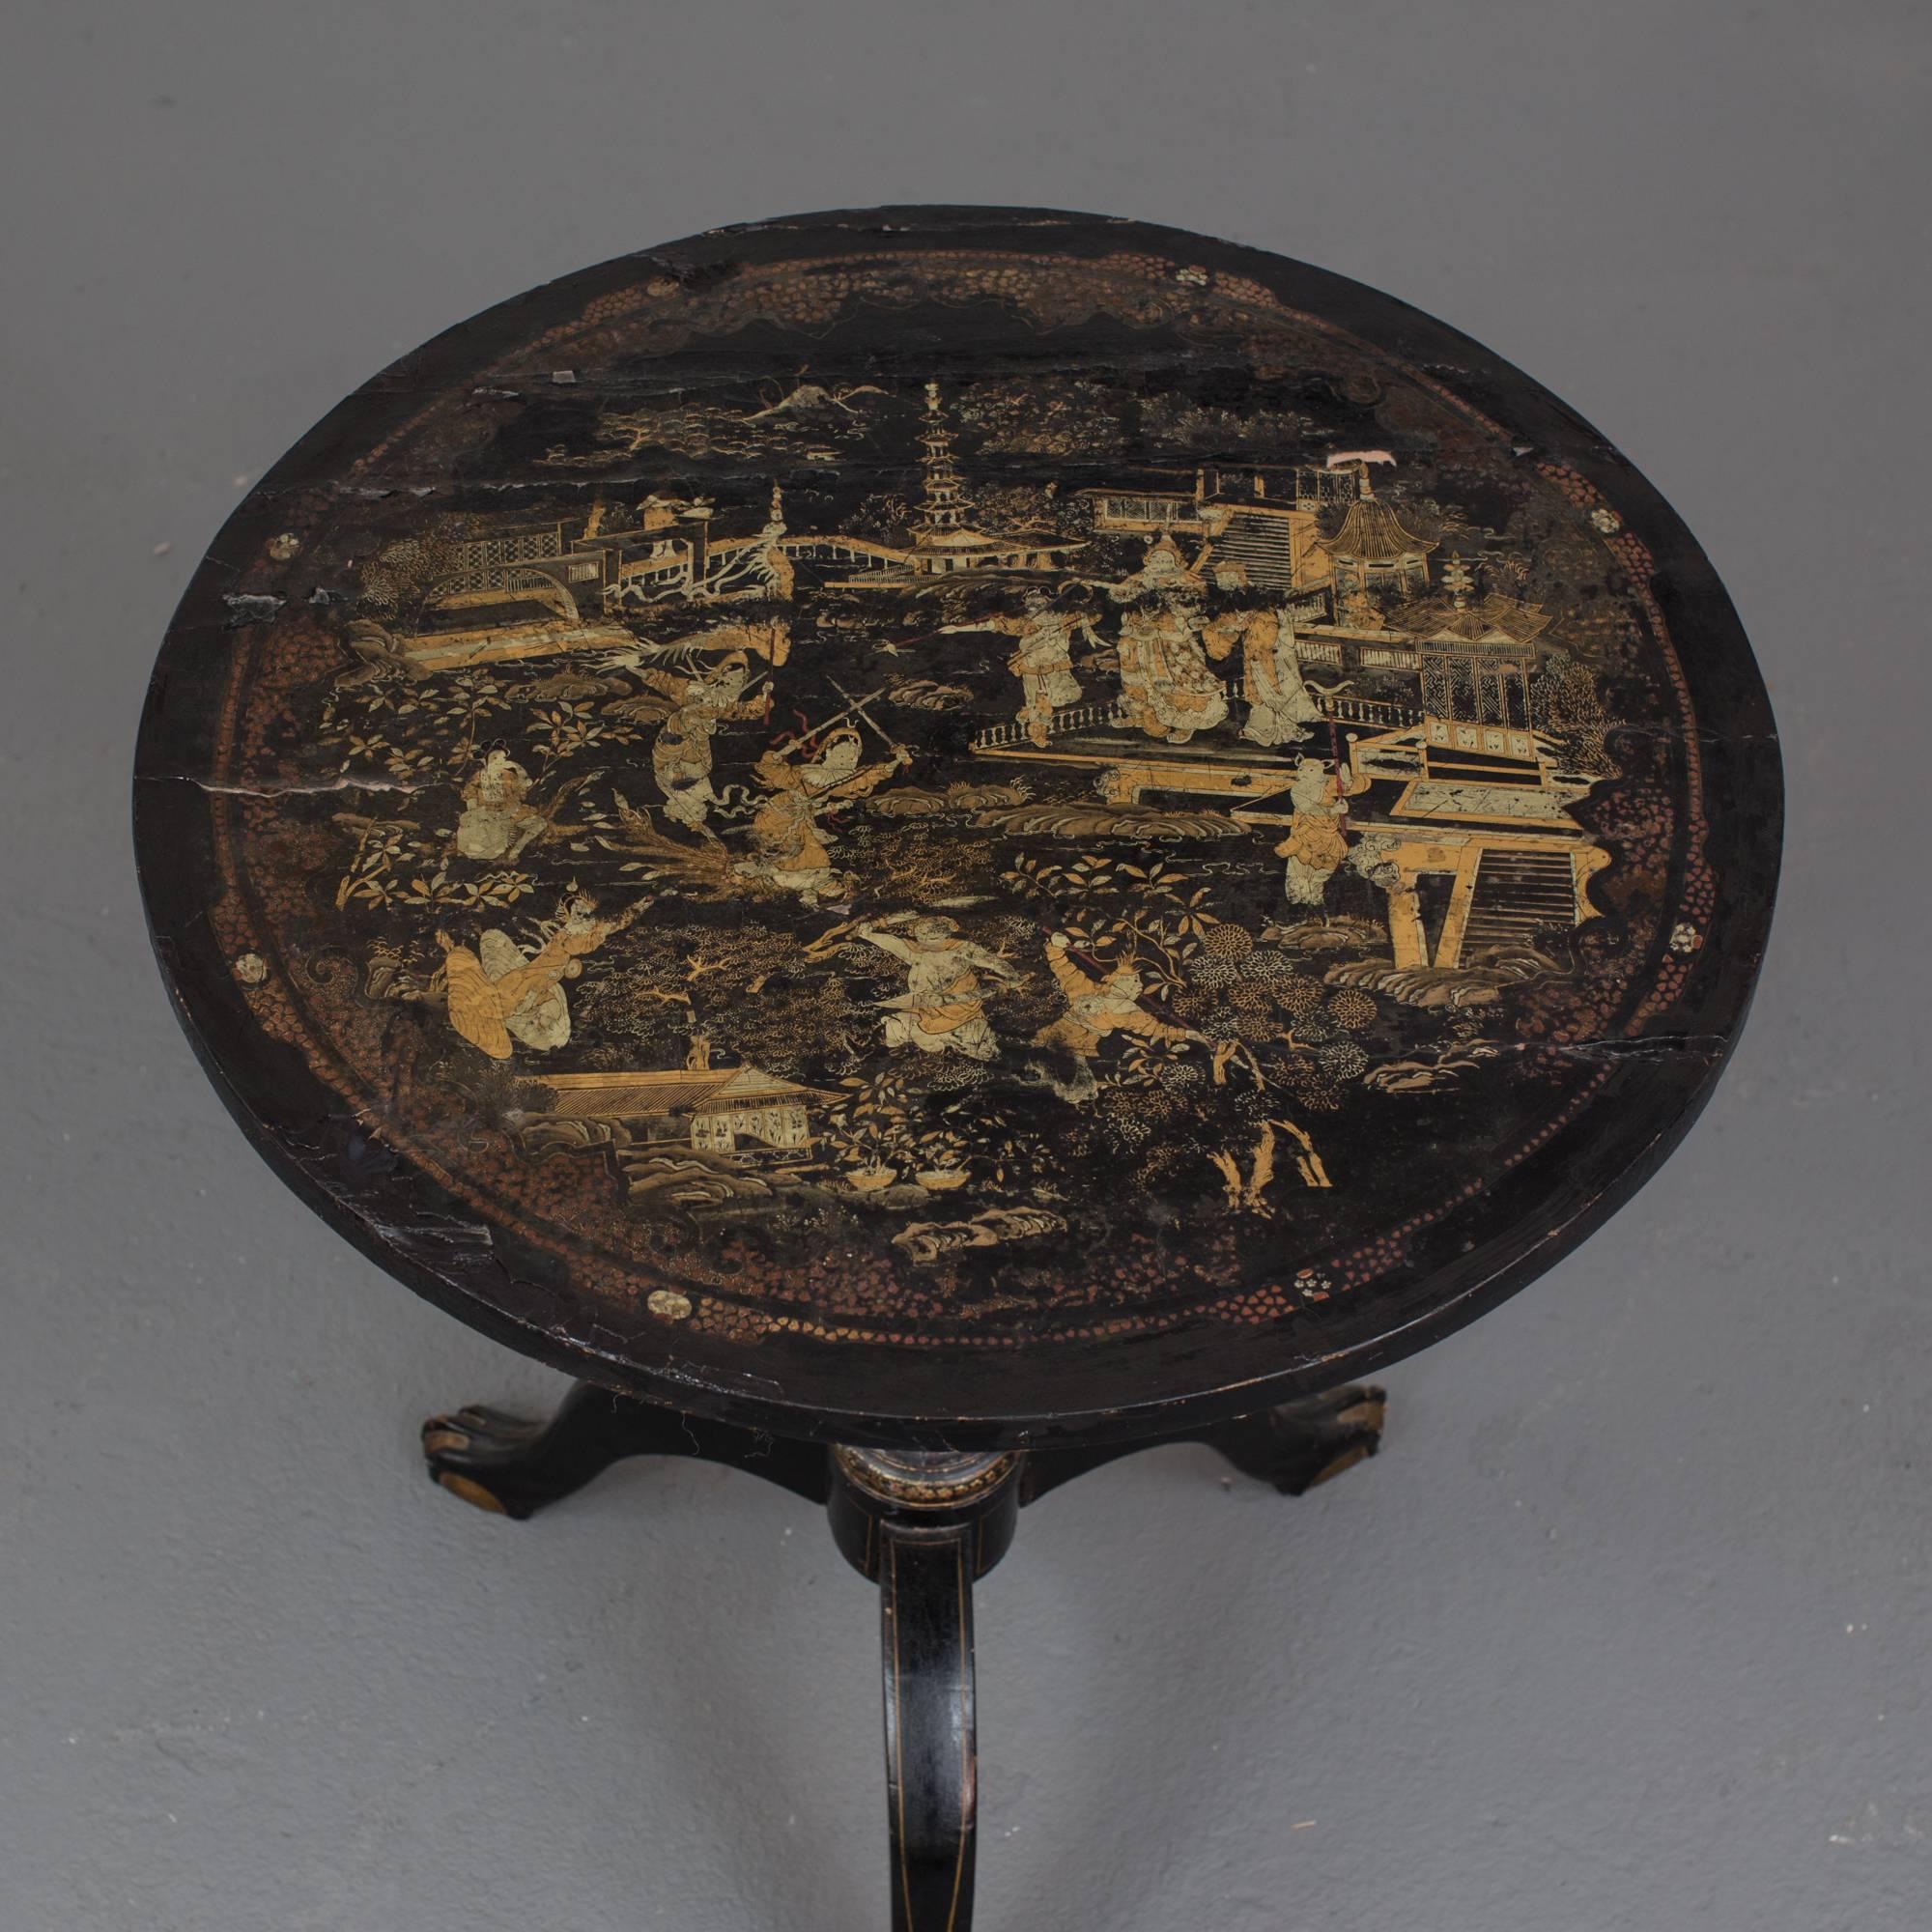 A pedestal table made during the 19th century a La chinoiserie. Black lacquered finish with gilded details. Round top on a centre pedestal standing on a tripod base. 

   